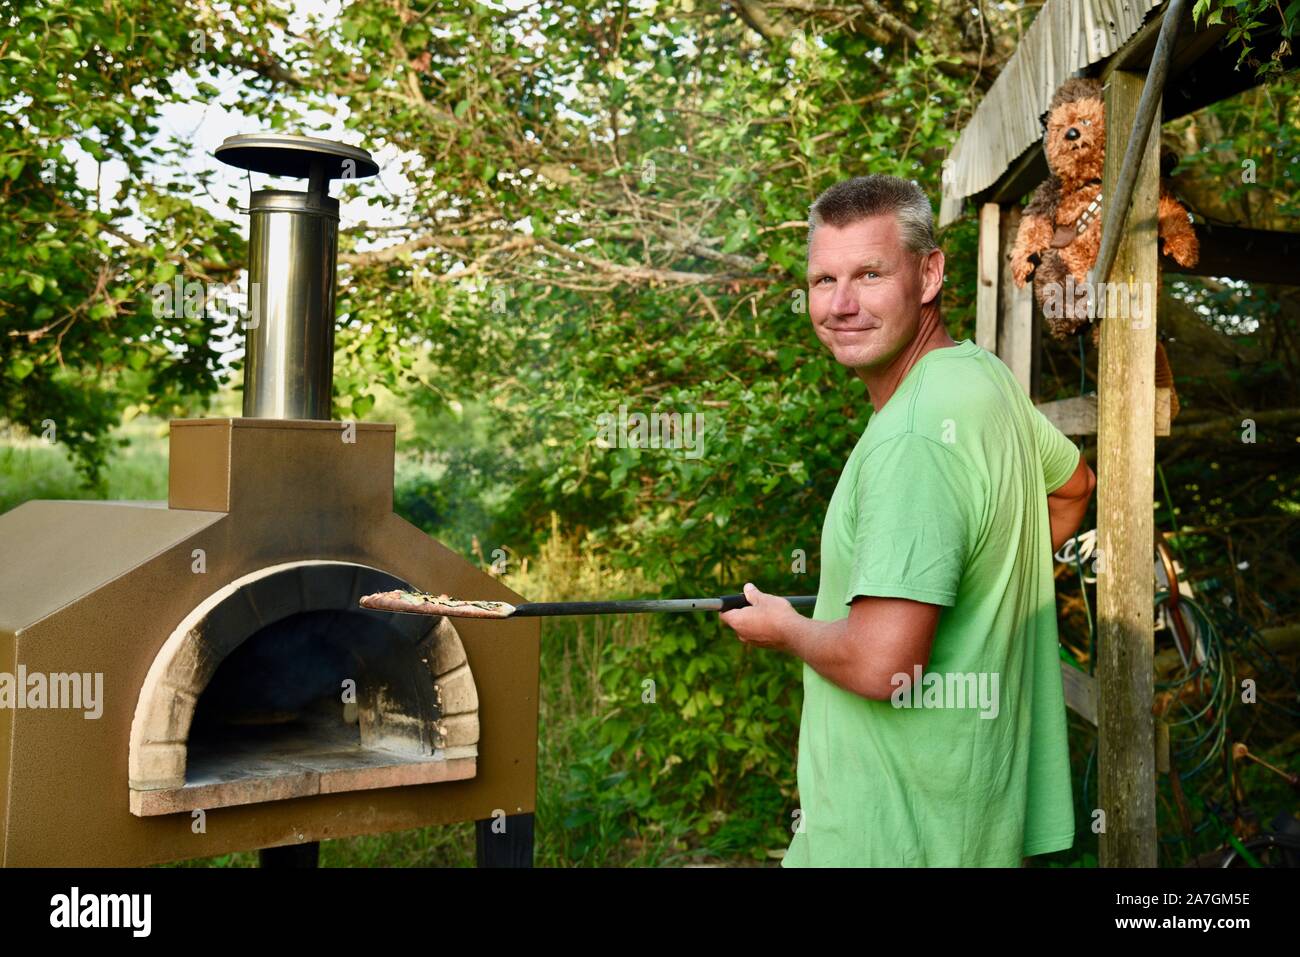 https://c8.alamy.com/comp/2A7GM5E/man-cooking-artisanal-pizza-outdoors-in-a-wood-fired-forno-bravo-oven-made-with-organic-ingredients-at-inn-serendipity-browntown-wisconsin-usa-2A7GM5E.jpg